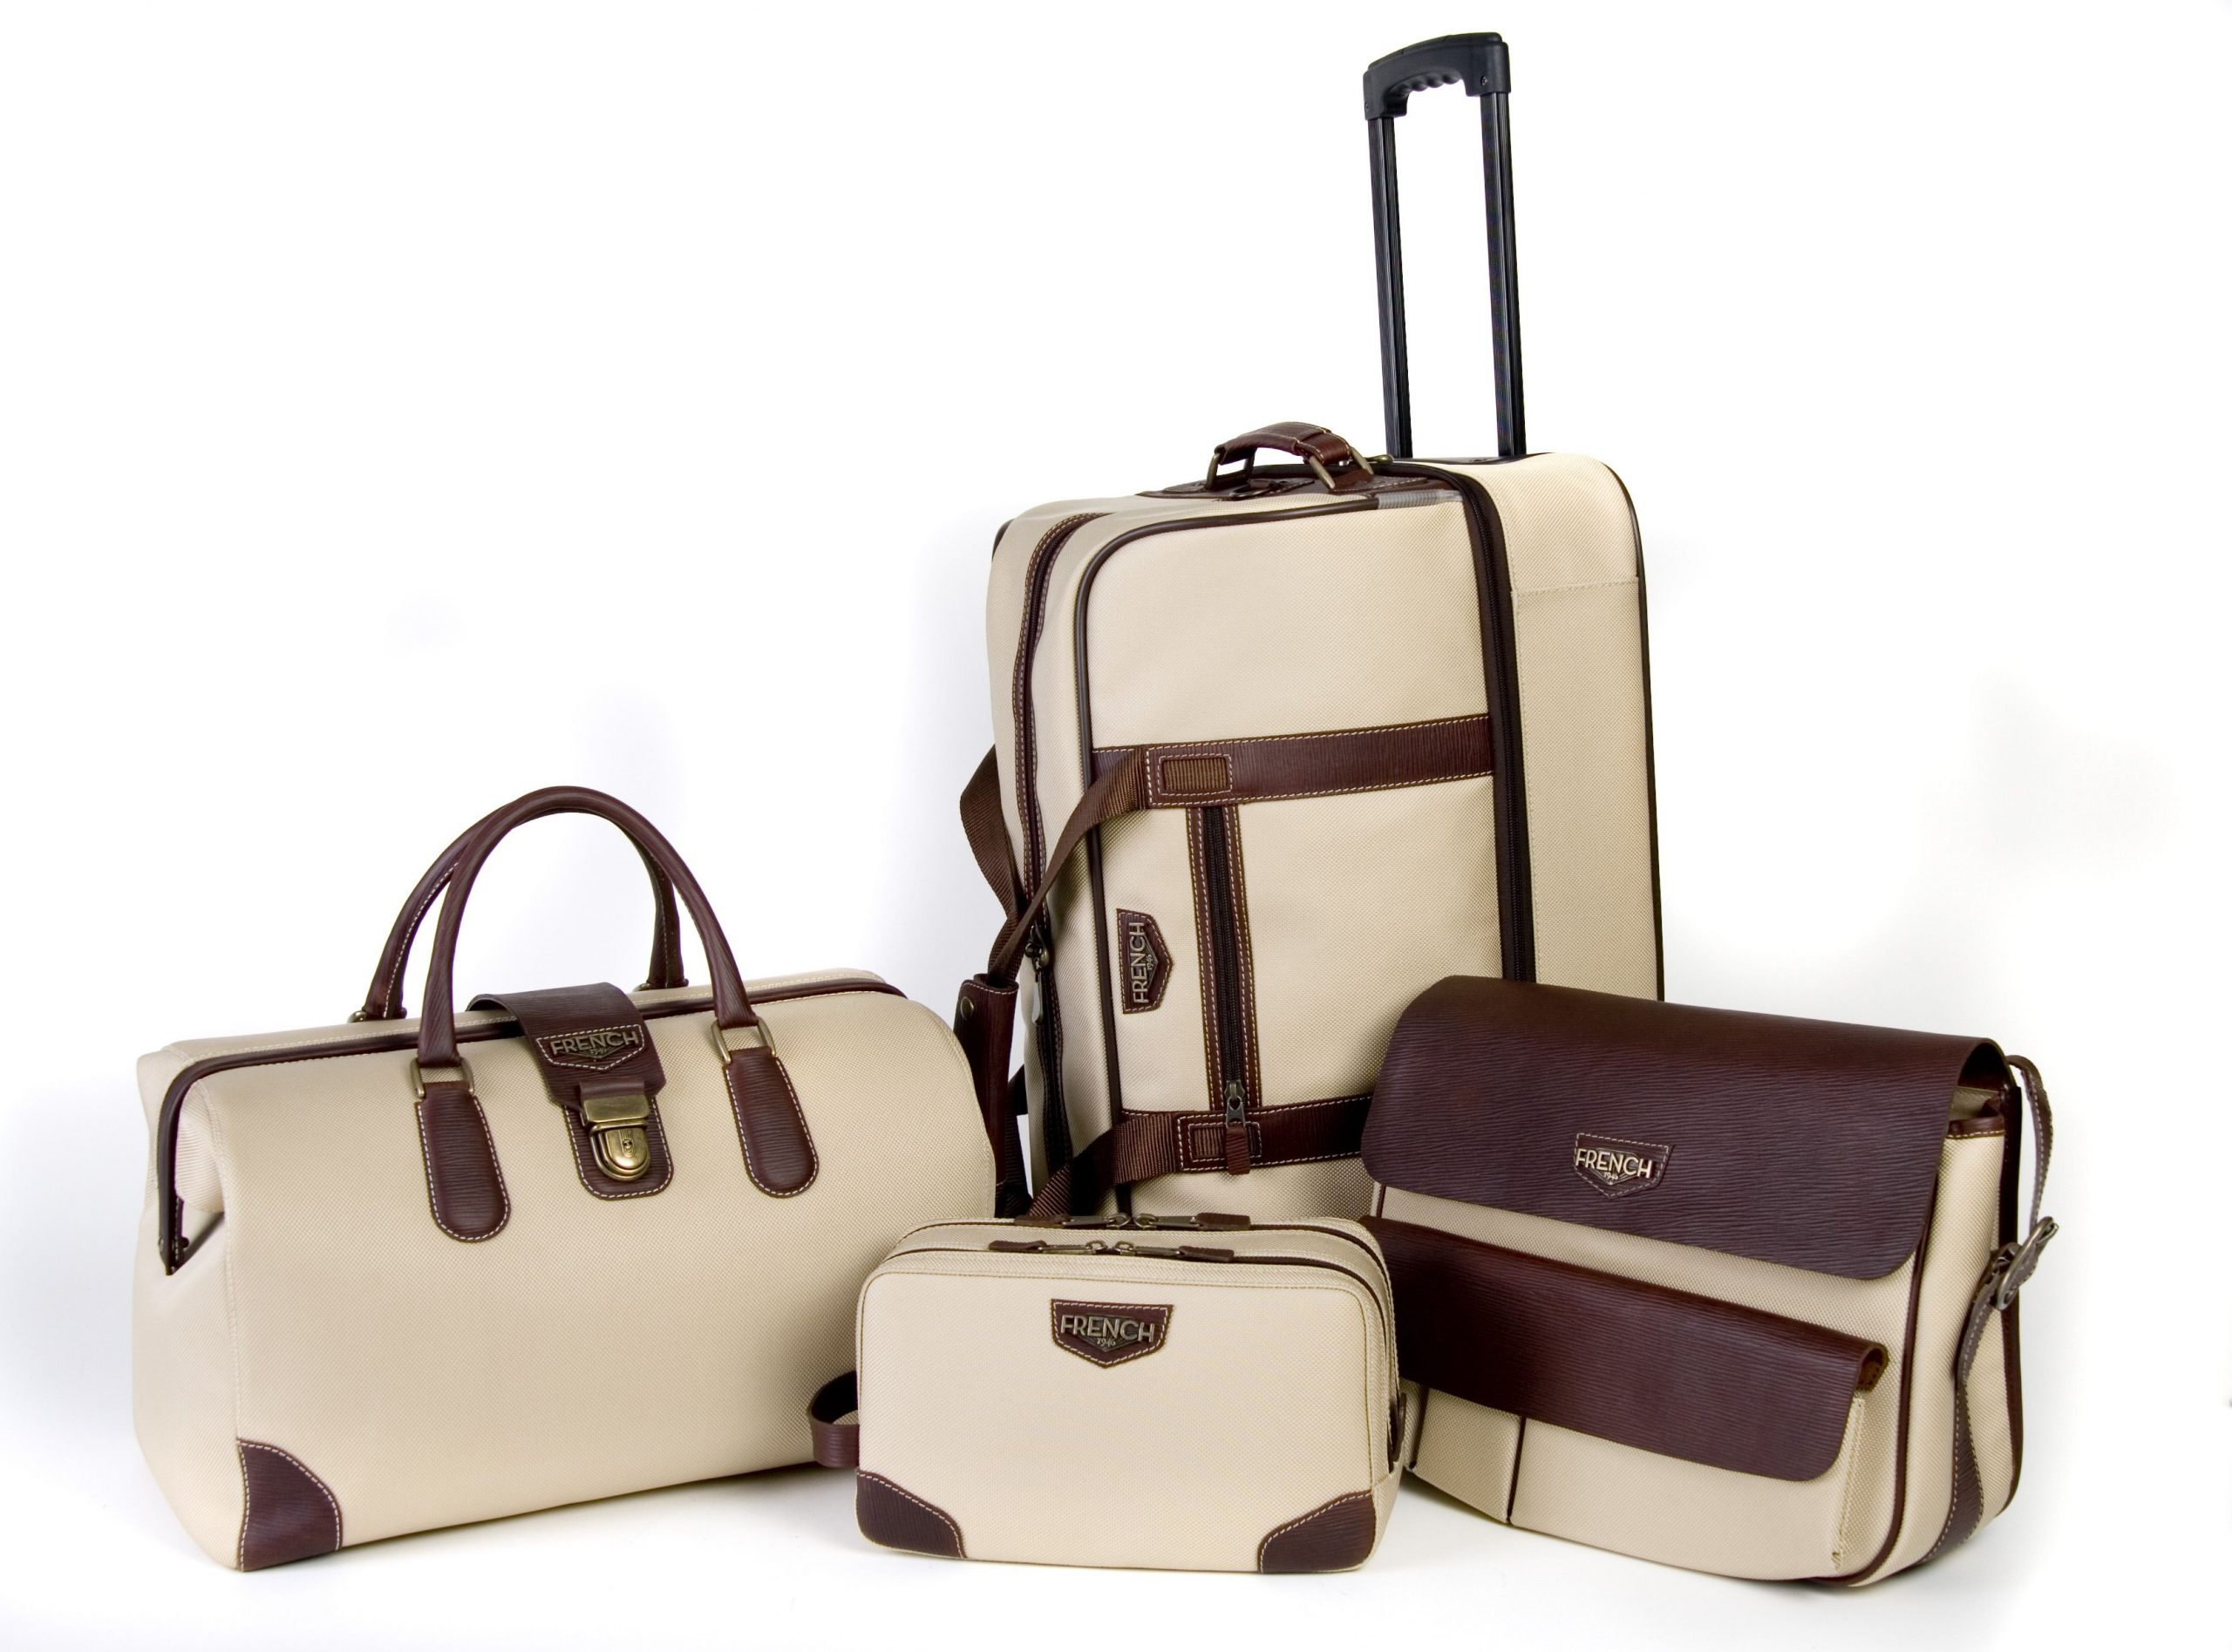 Through a reliable site, you can buy quality premium travel luggage